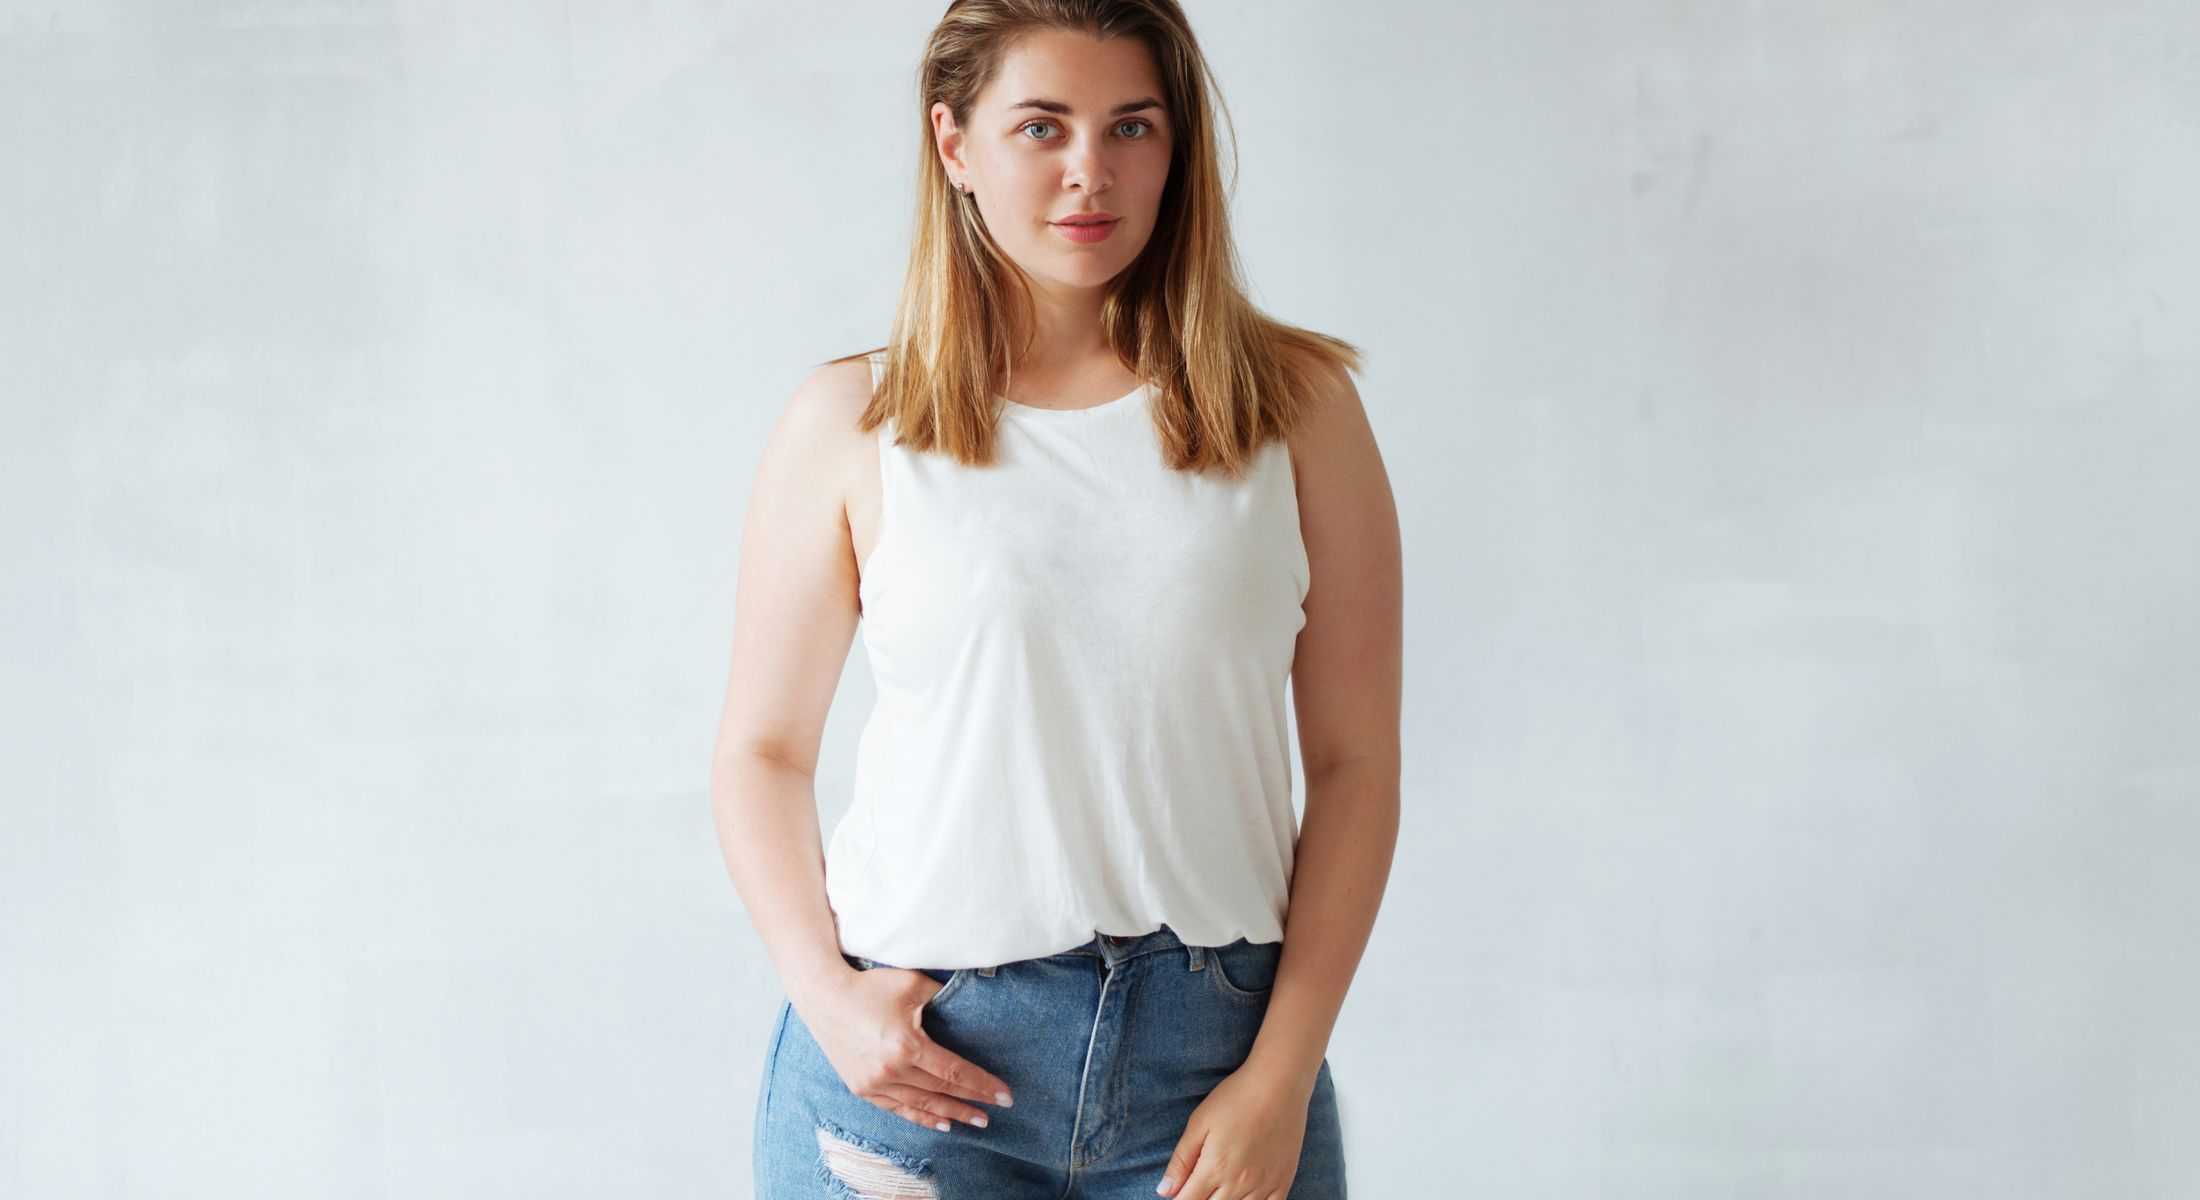 Franklin fat reduction model in white shirt